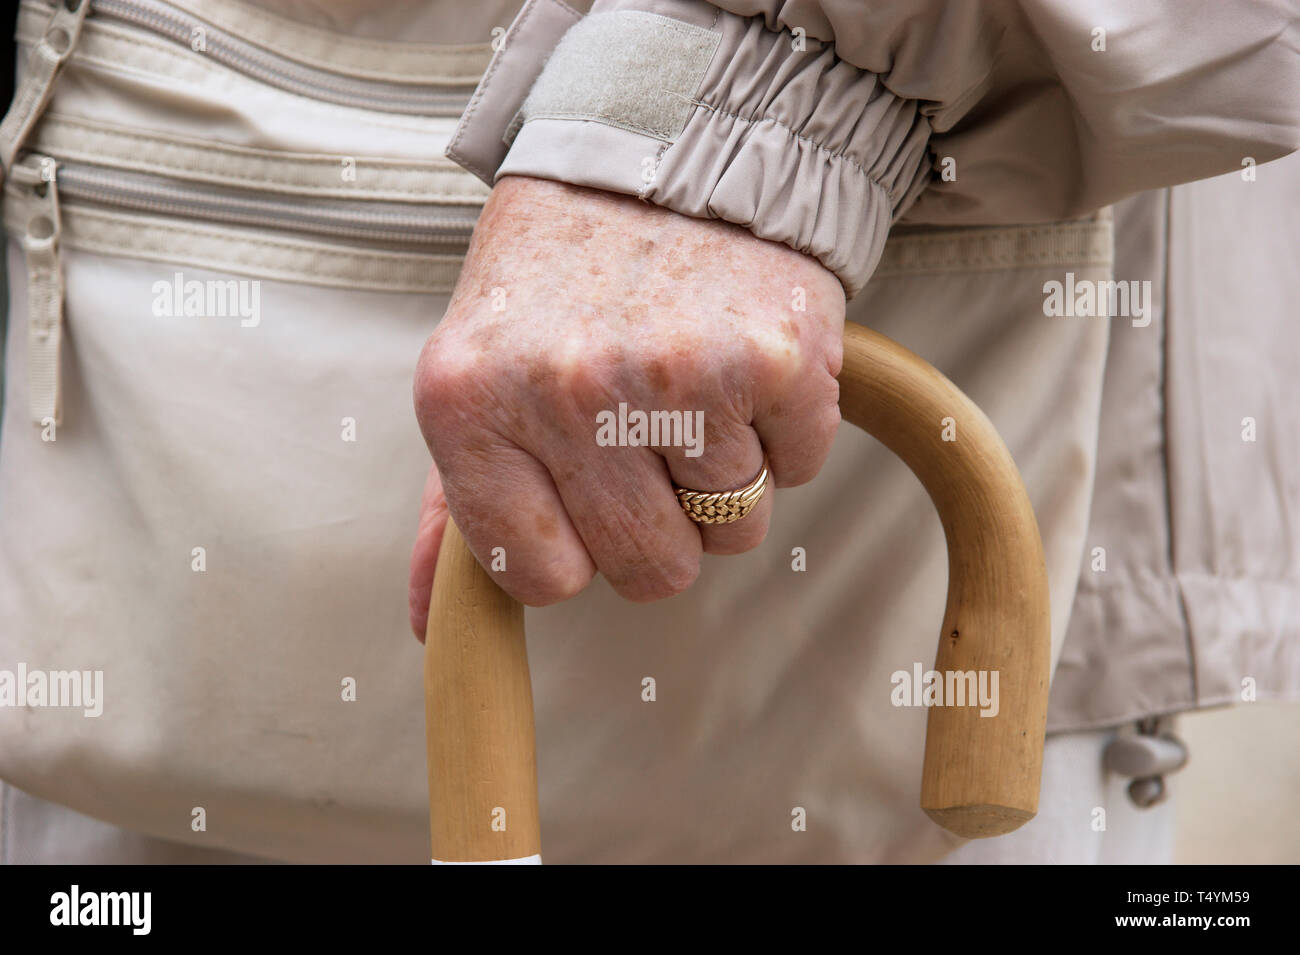 Elderly woman using a walking stick to help with mobility Stock Photo